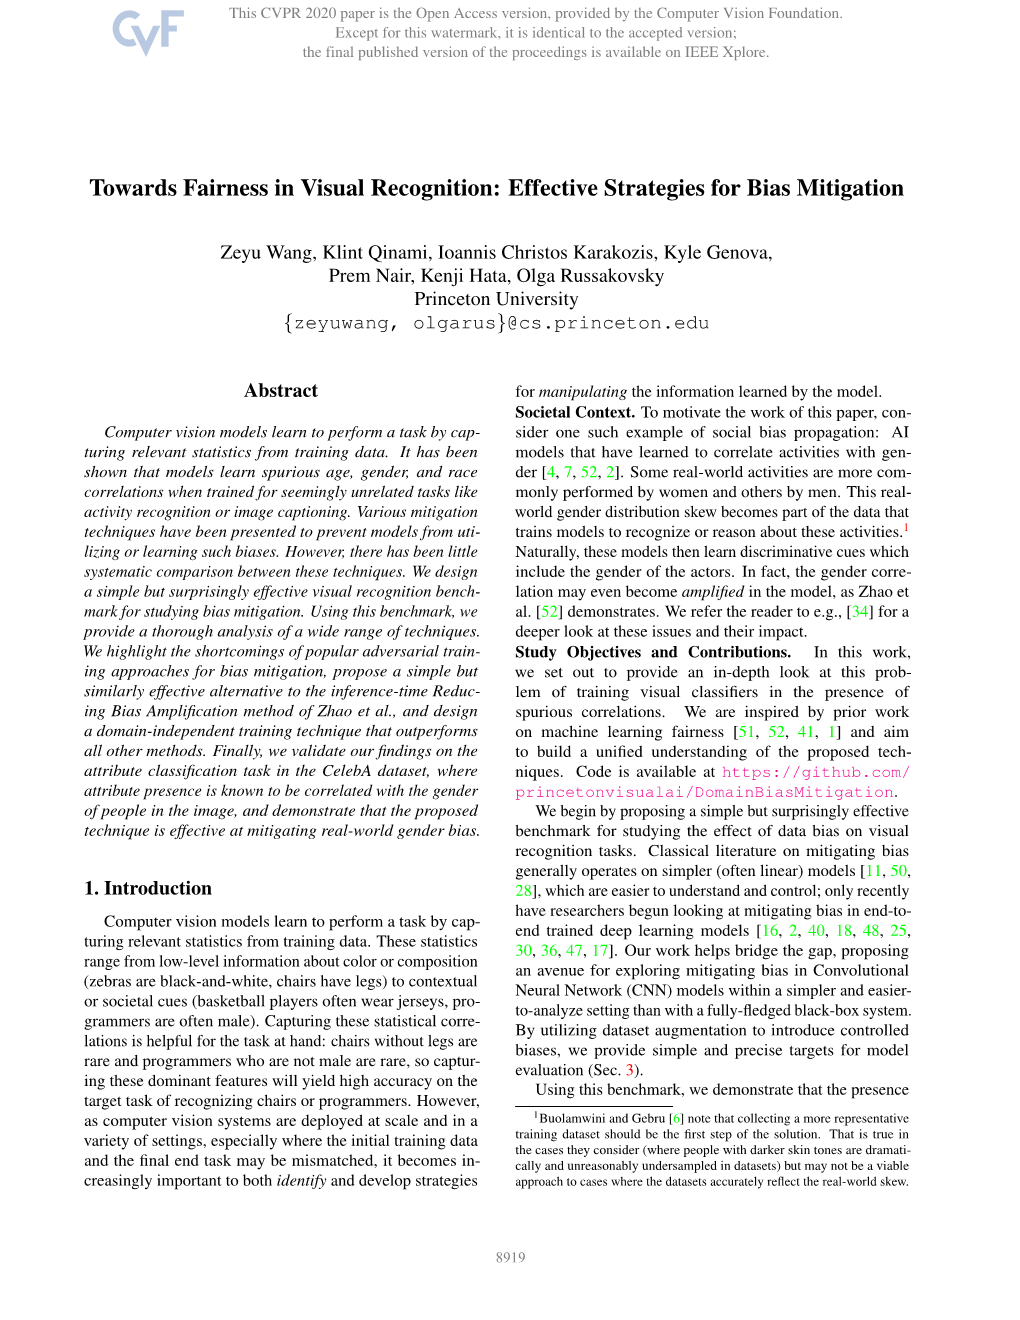 Towards Fairness in Visual Recognition: Effective Strategies for Bias Mitigation